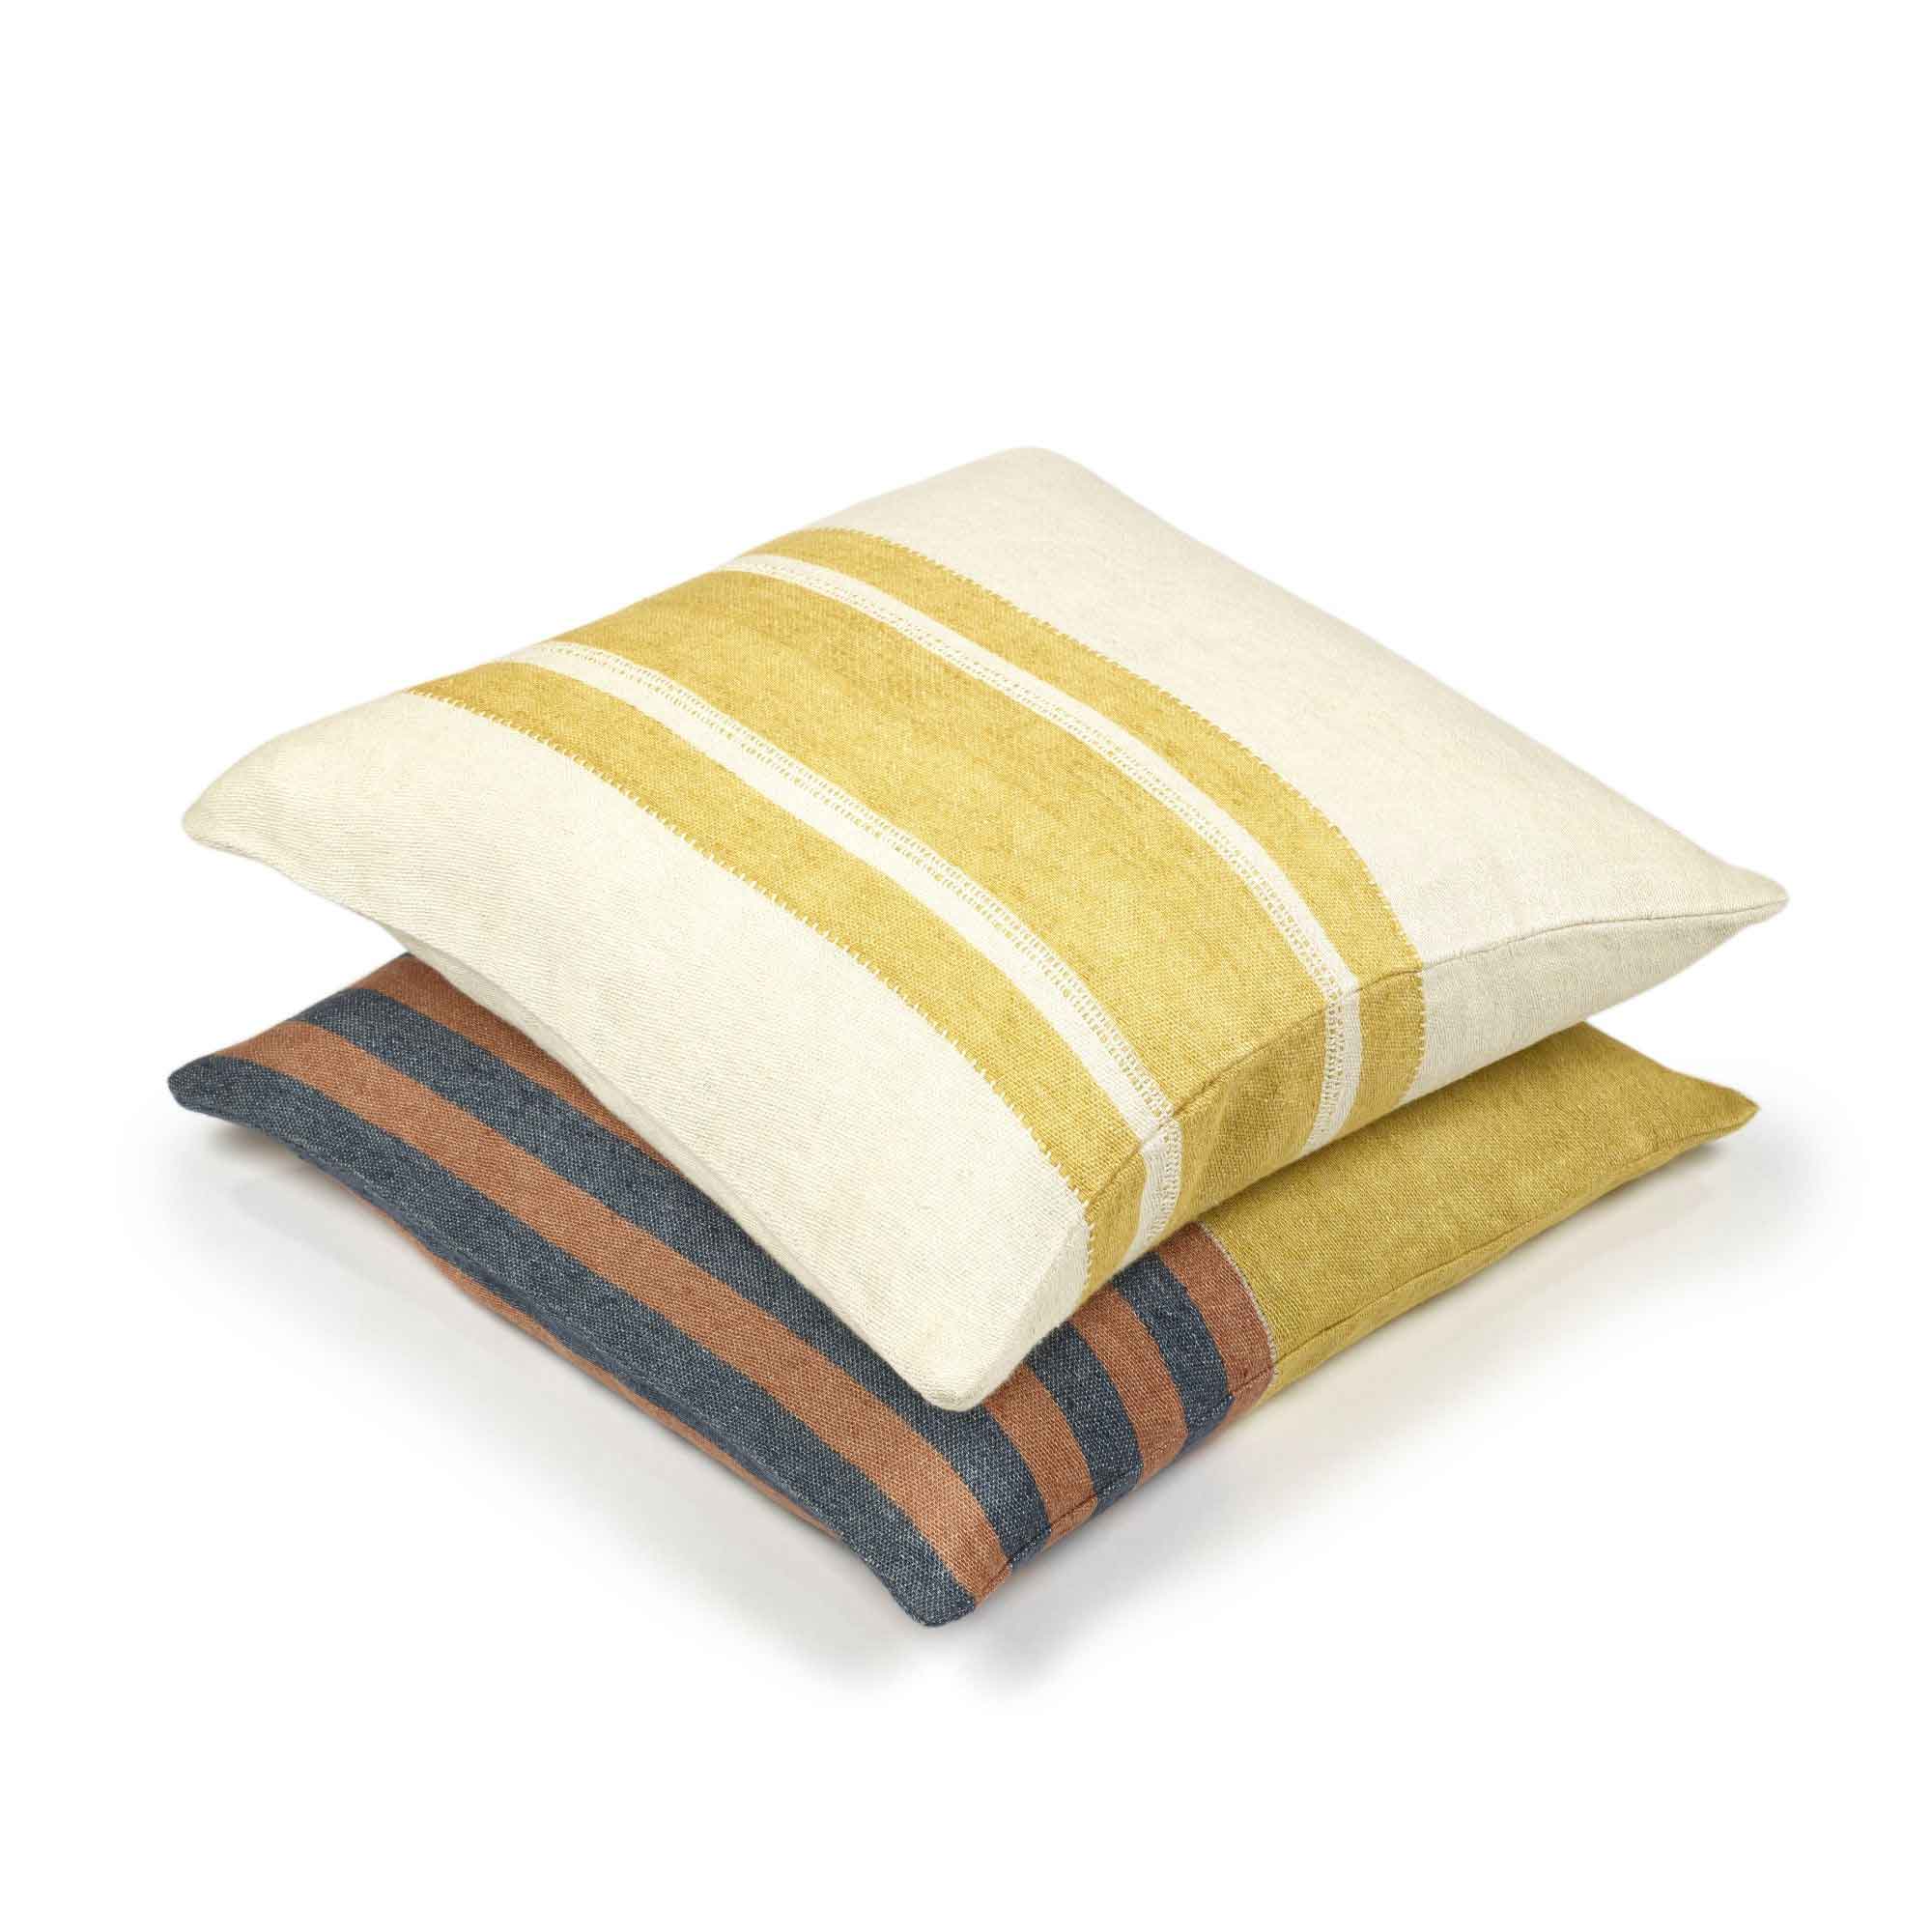 Belgian linen throw pillow covers stacked in colors Mustard Stripe and Read Earth by Libeco for South Hous.